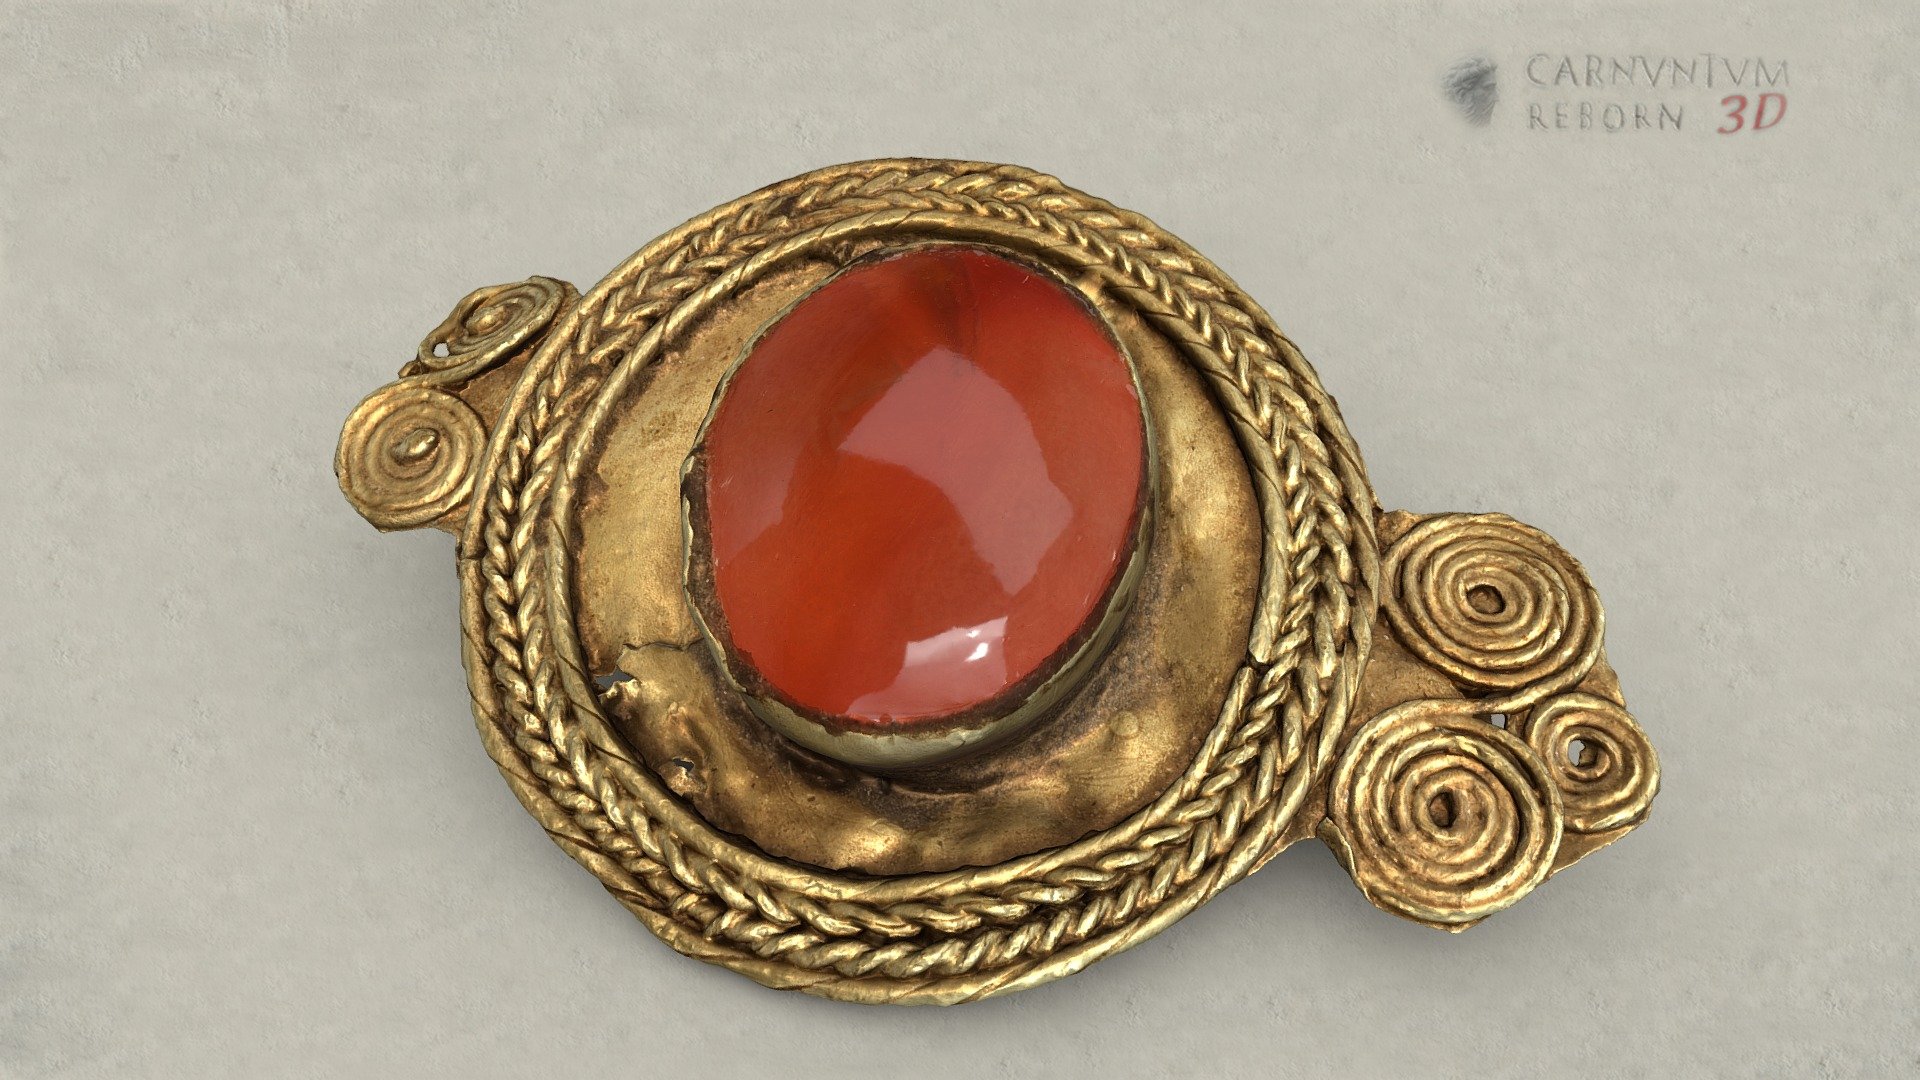 Roman fibula with flat disc with side projections (spiral decoration). The edge of the disc is set with simple or braided gold wire. High box setting with orange-red gemstone (carnelian). Needle construction soldered on the back. Gold, carnelian; l 3,2 cm; End of 2nd - beginning of 3rd century AD.

Model: © Landessammlungen Niederösterreich, Niederösterreich 3D - Fibel - 3D model by noe-3d.at (@www.noe-3d.at) 3d model